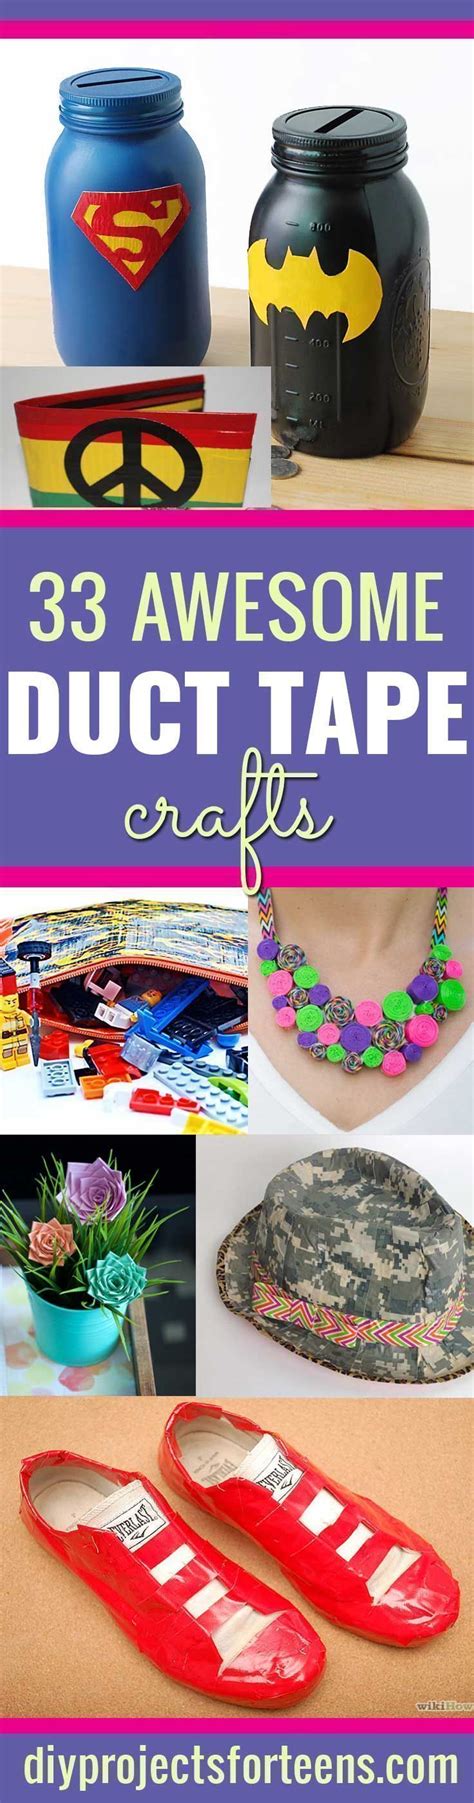 33 Amazingly Awesome Duct Tape Projects Tape Crafts Duct Tape Crafts